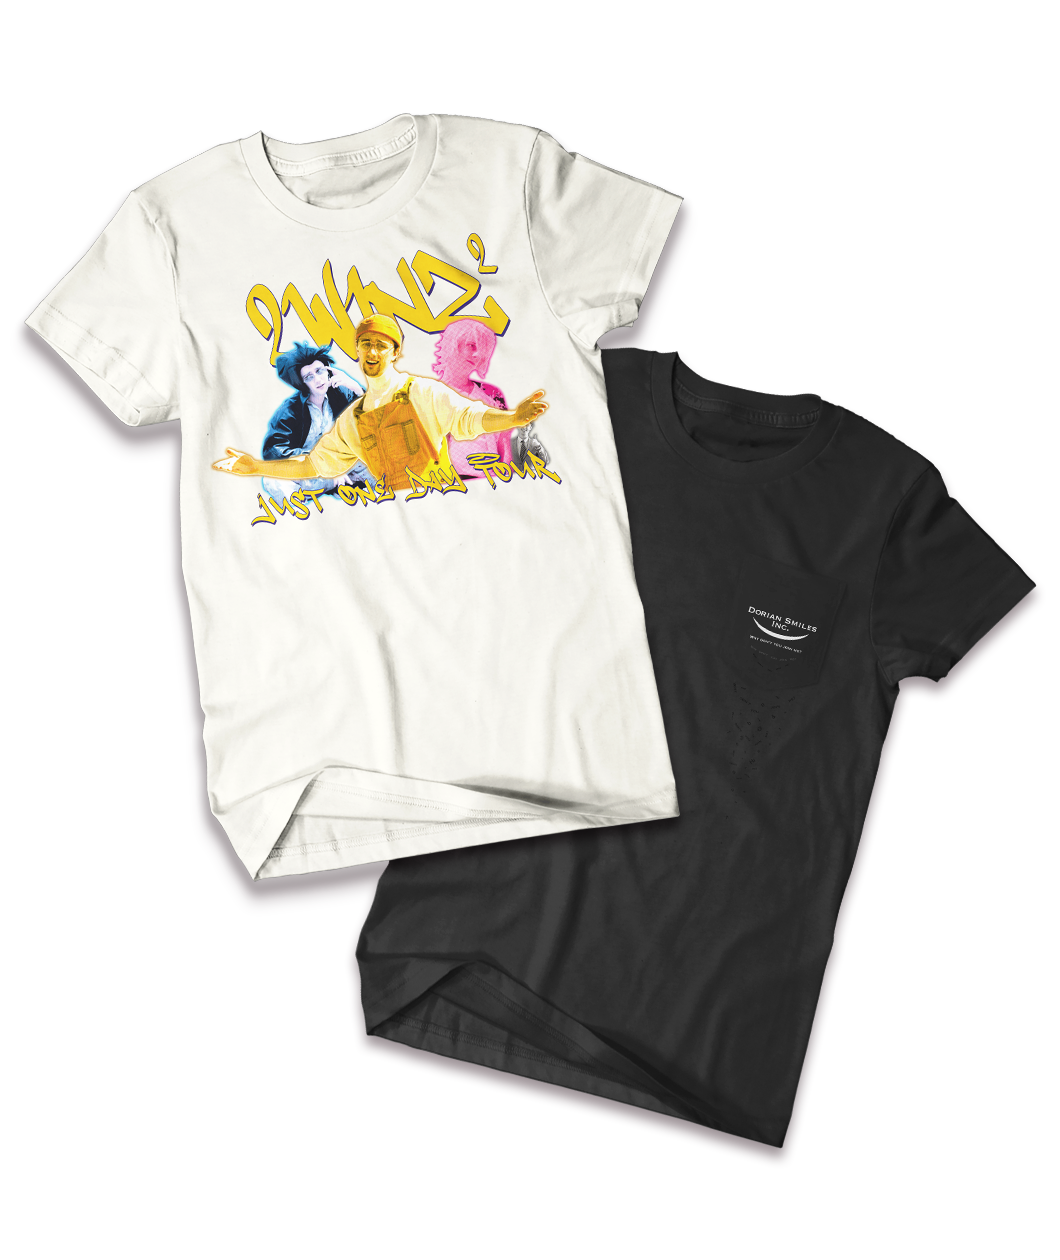 Two shirts bundled together, one black t-shirt with a small pocket on the right side of the chest with white writing on it and one white t-shirt with stylized yellow writing that says 